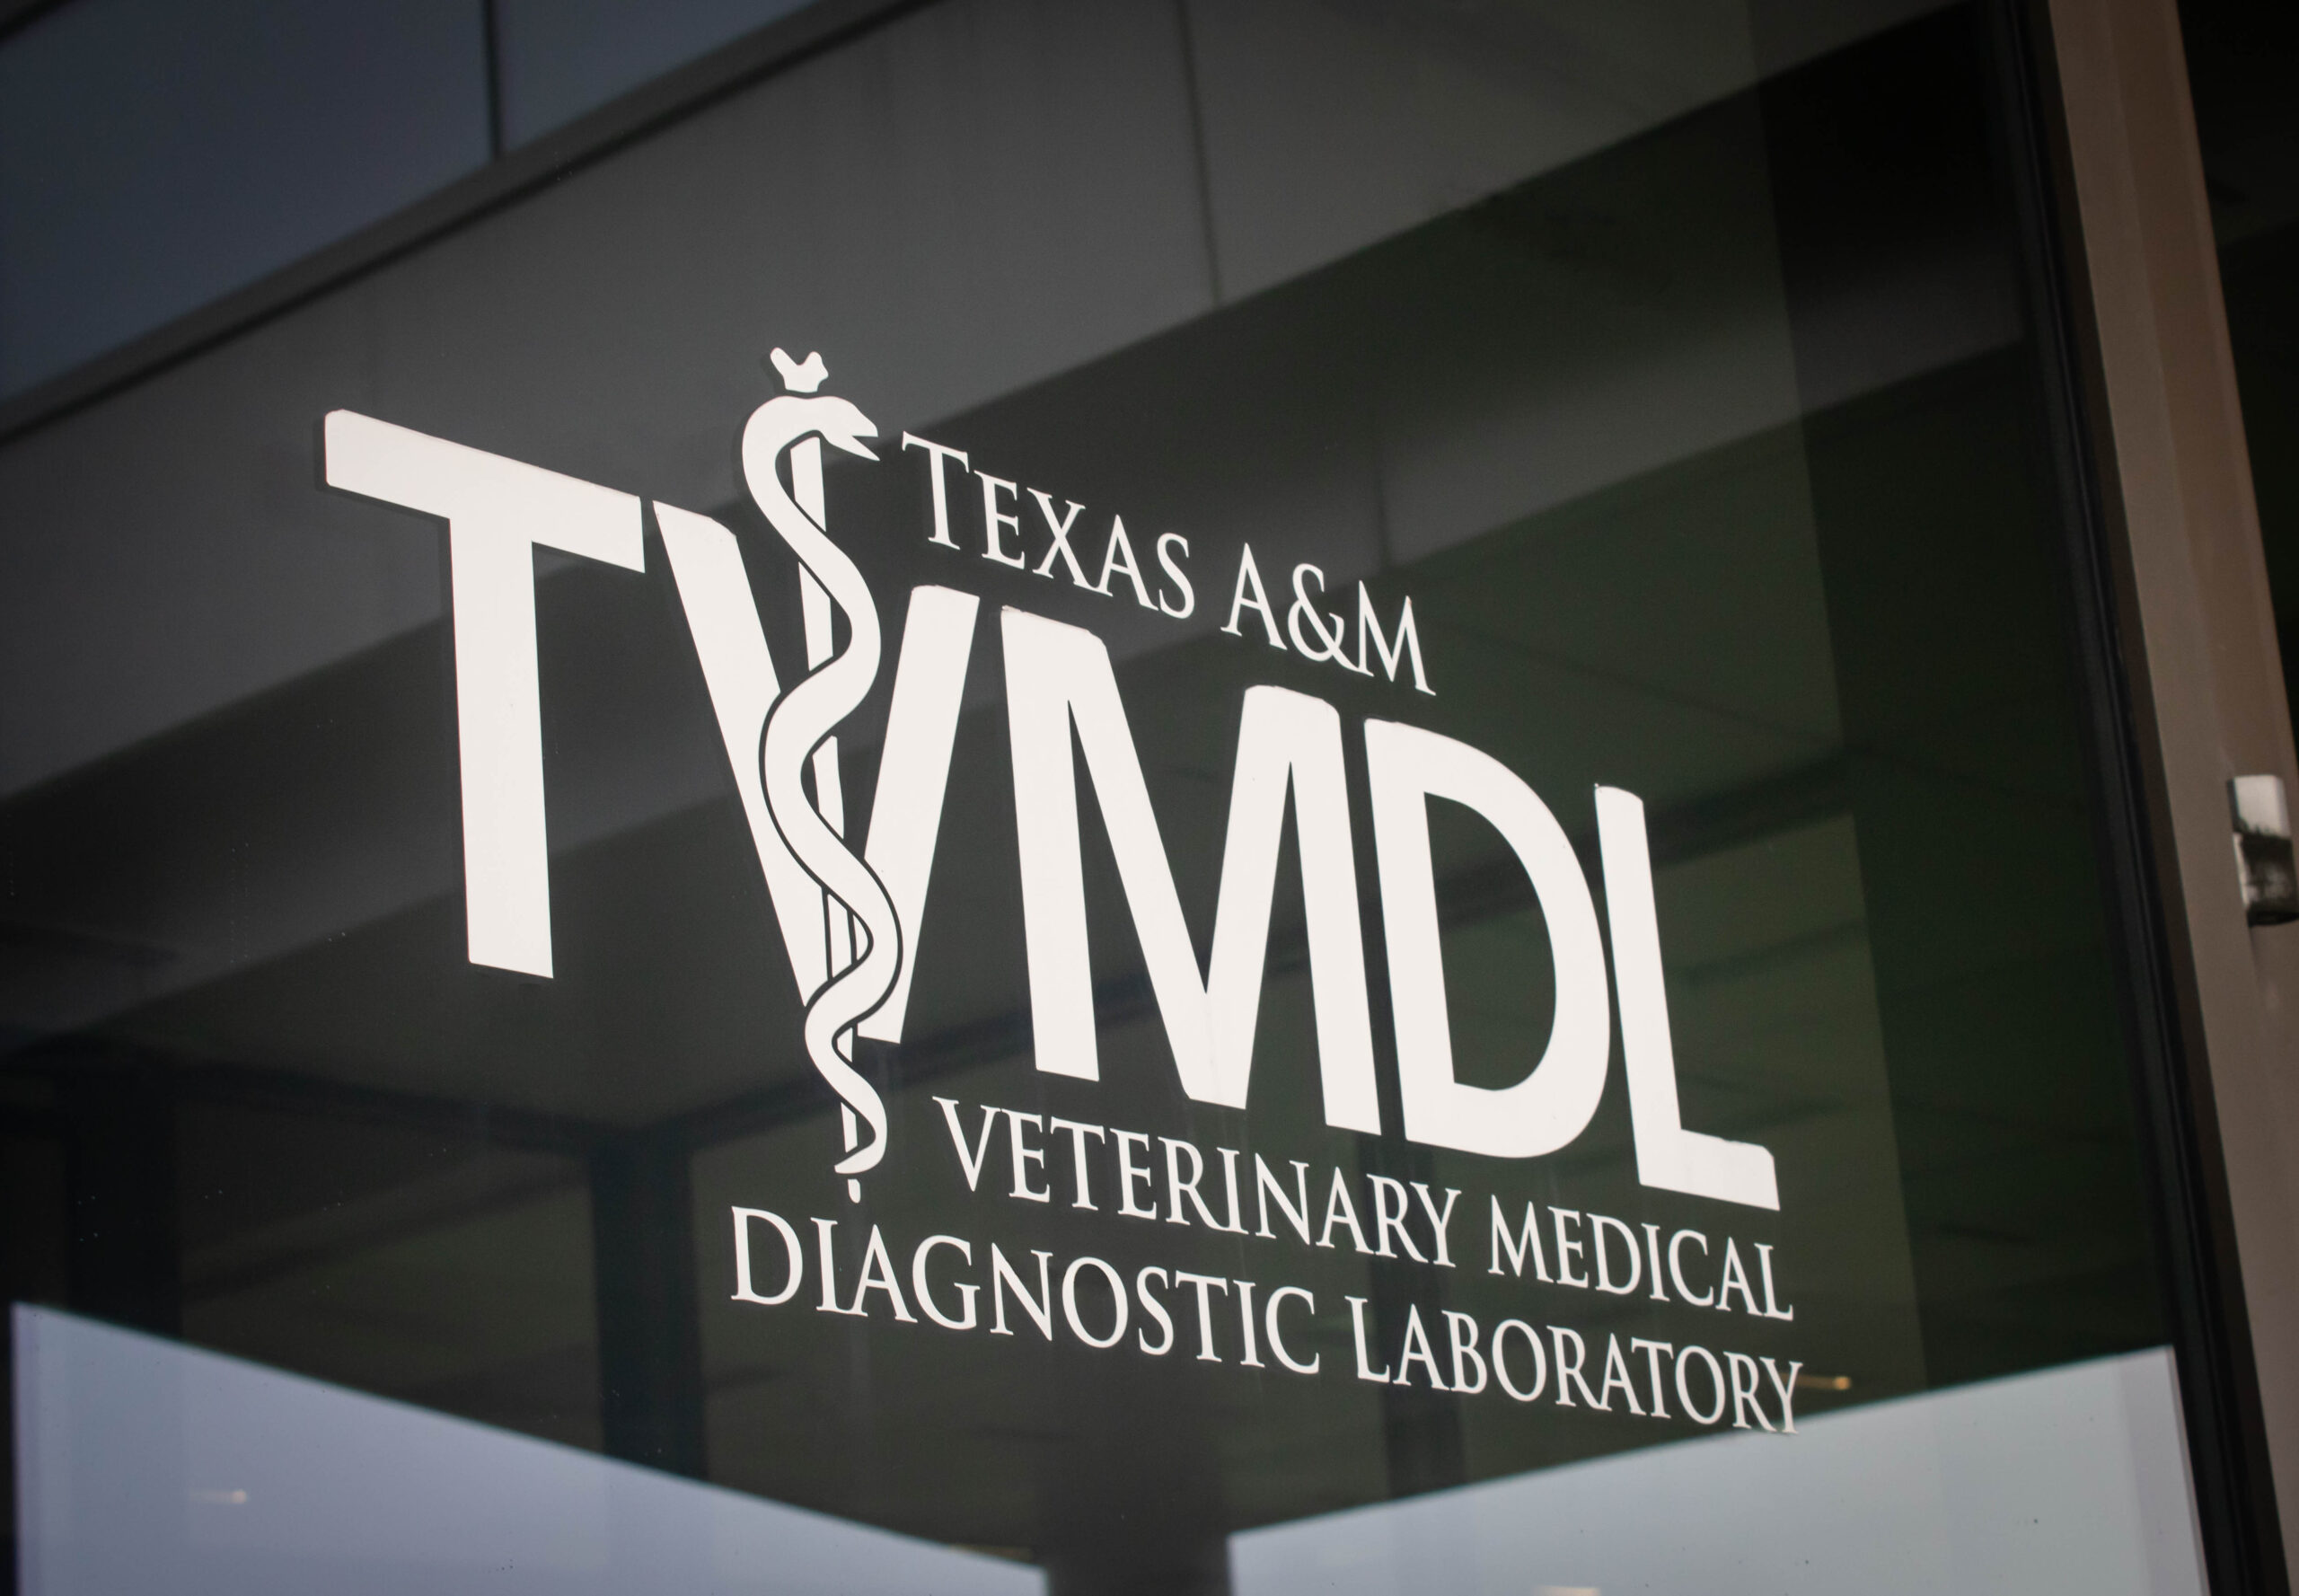 Internationally recognized Texas A&M Veterinary Medical Diagnostic Laboratory leader dies